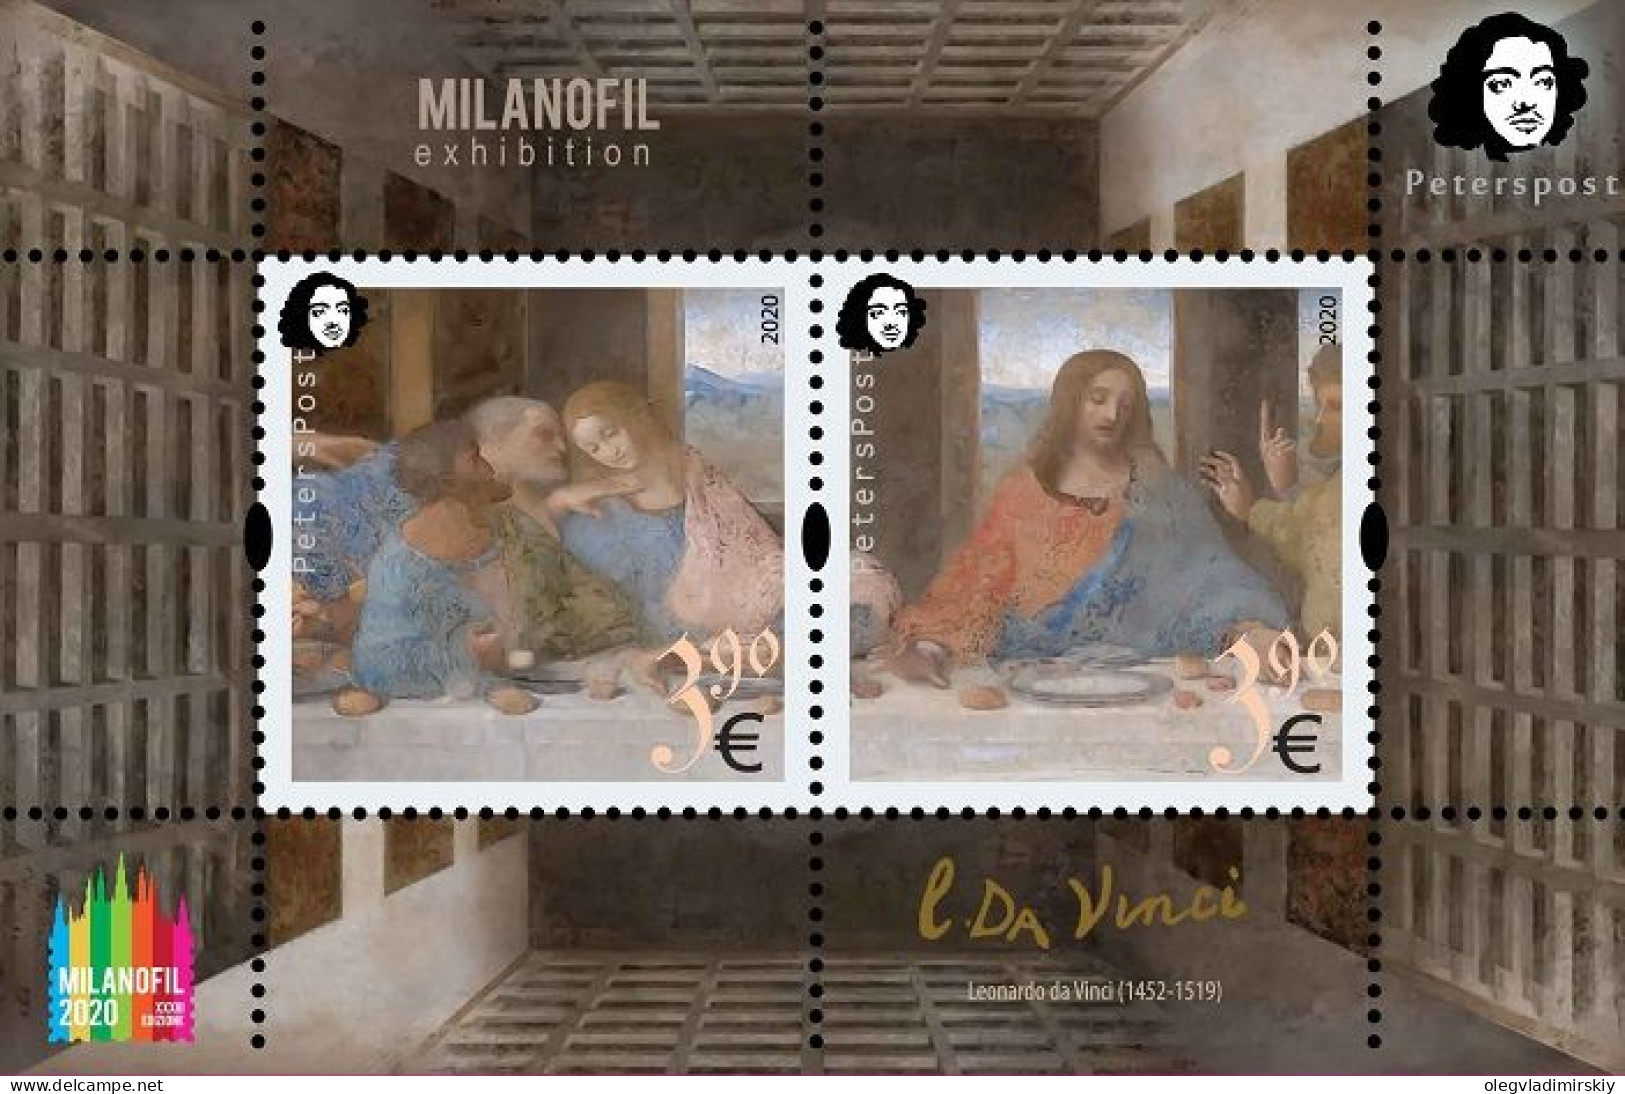 Finland 2020 Leonardo Da Vinci 500 Years From The Date Of Death "The Lord's Supper" MILANOFIL-2020 Peterspost Block MNH - Hojas Bloque